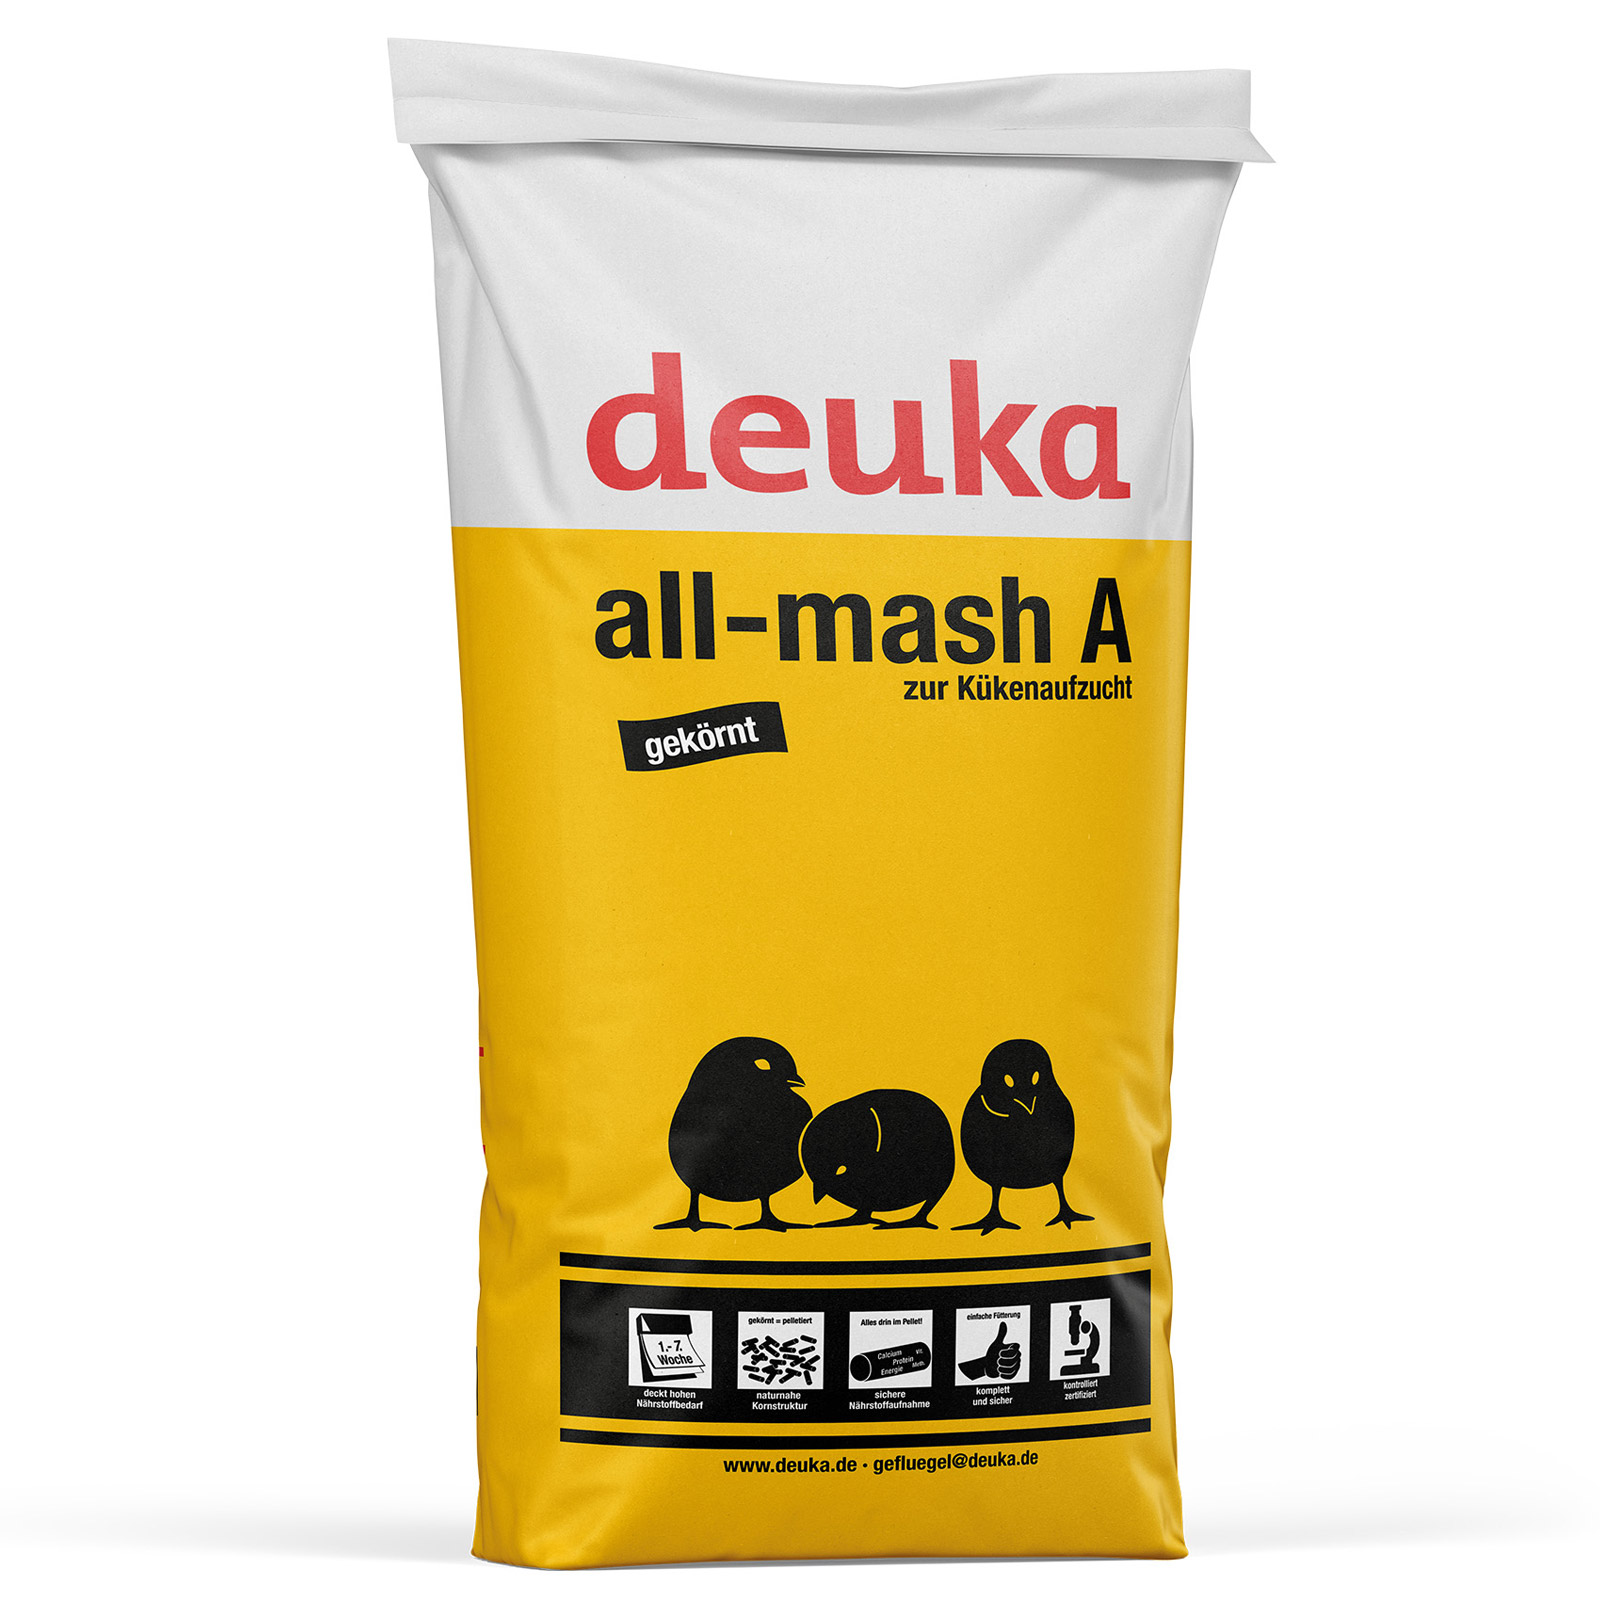 Deuka All-Mash A Pellet without COCC Chick Feed 25 kg